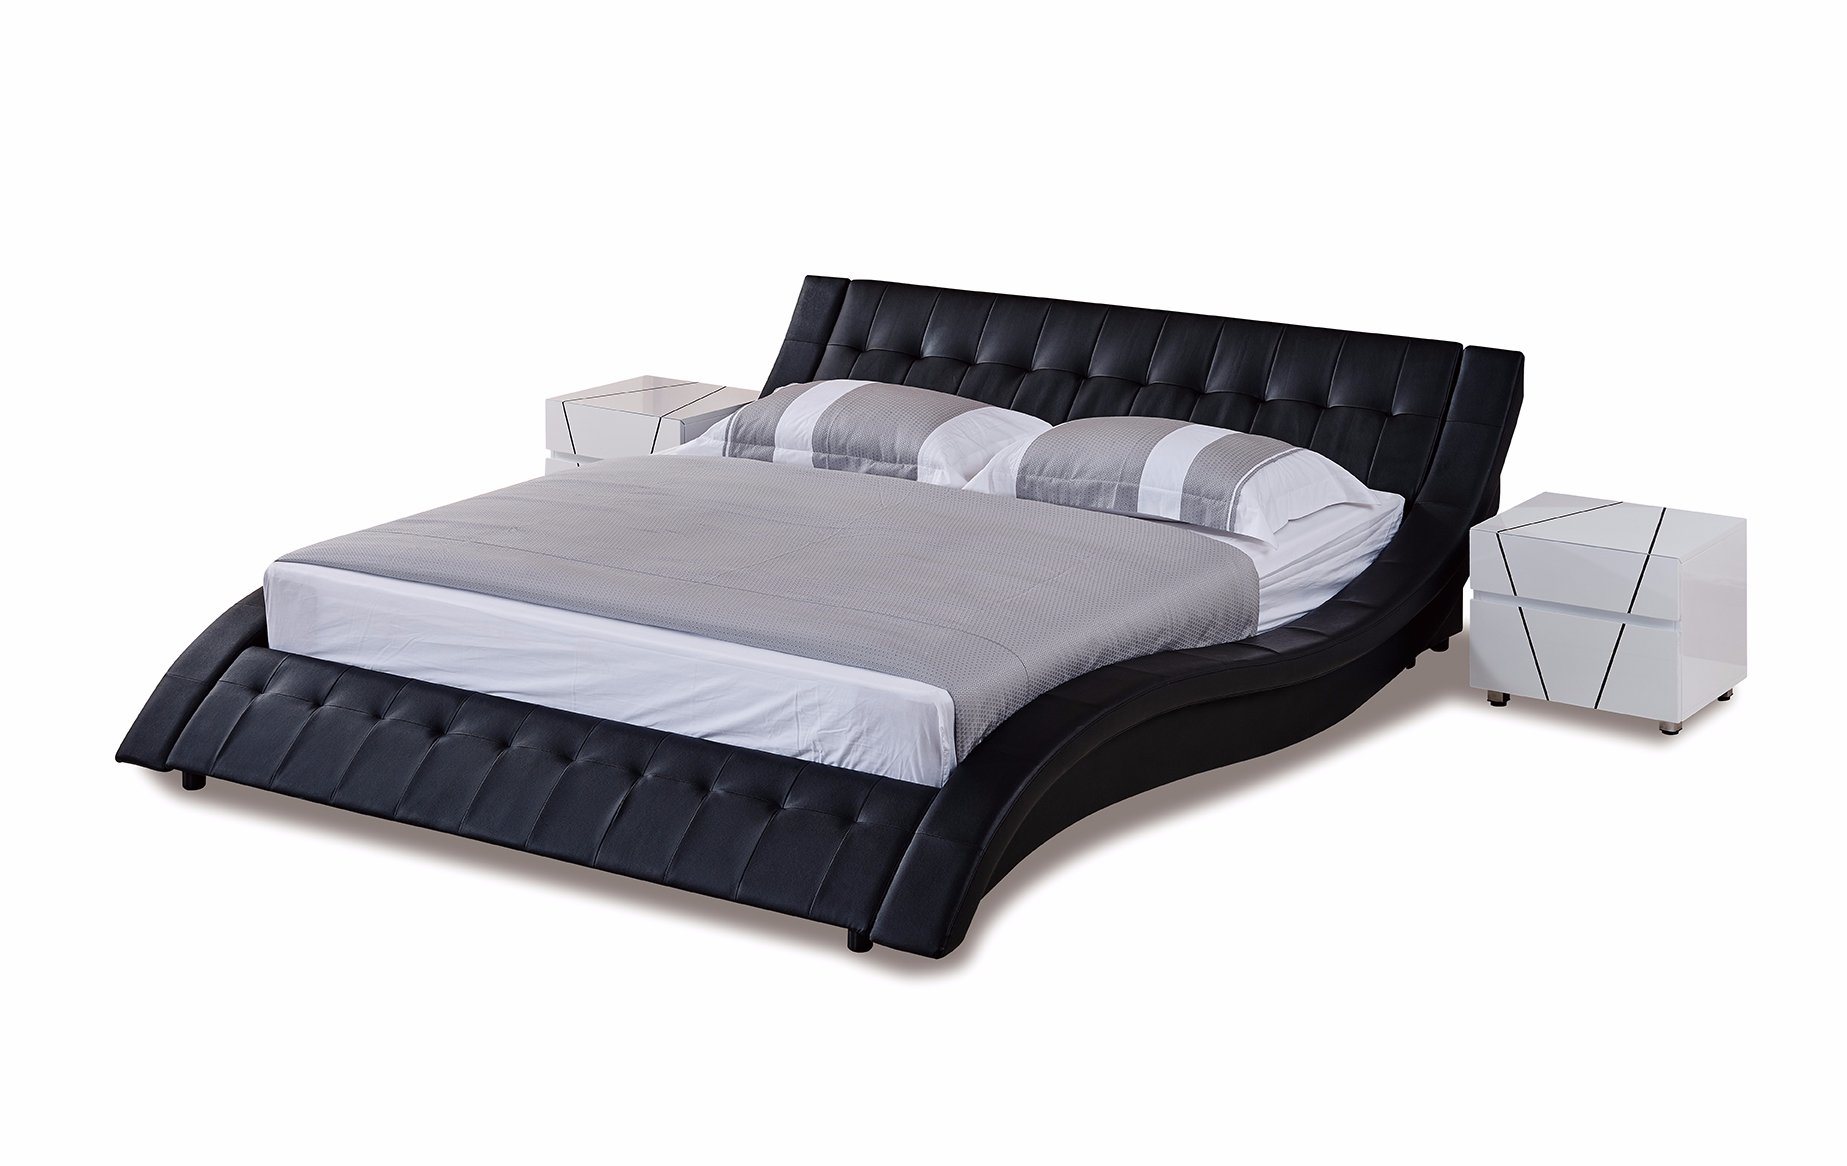 Wave Shape Bed Modern Tufted Headboard Leather Bed